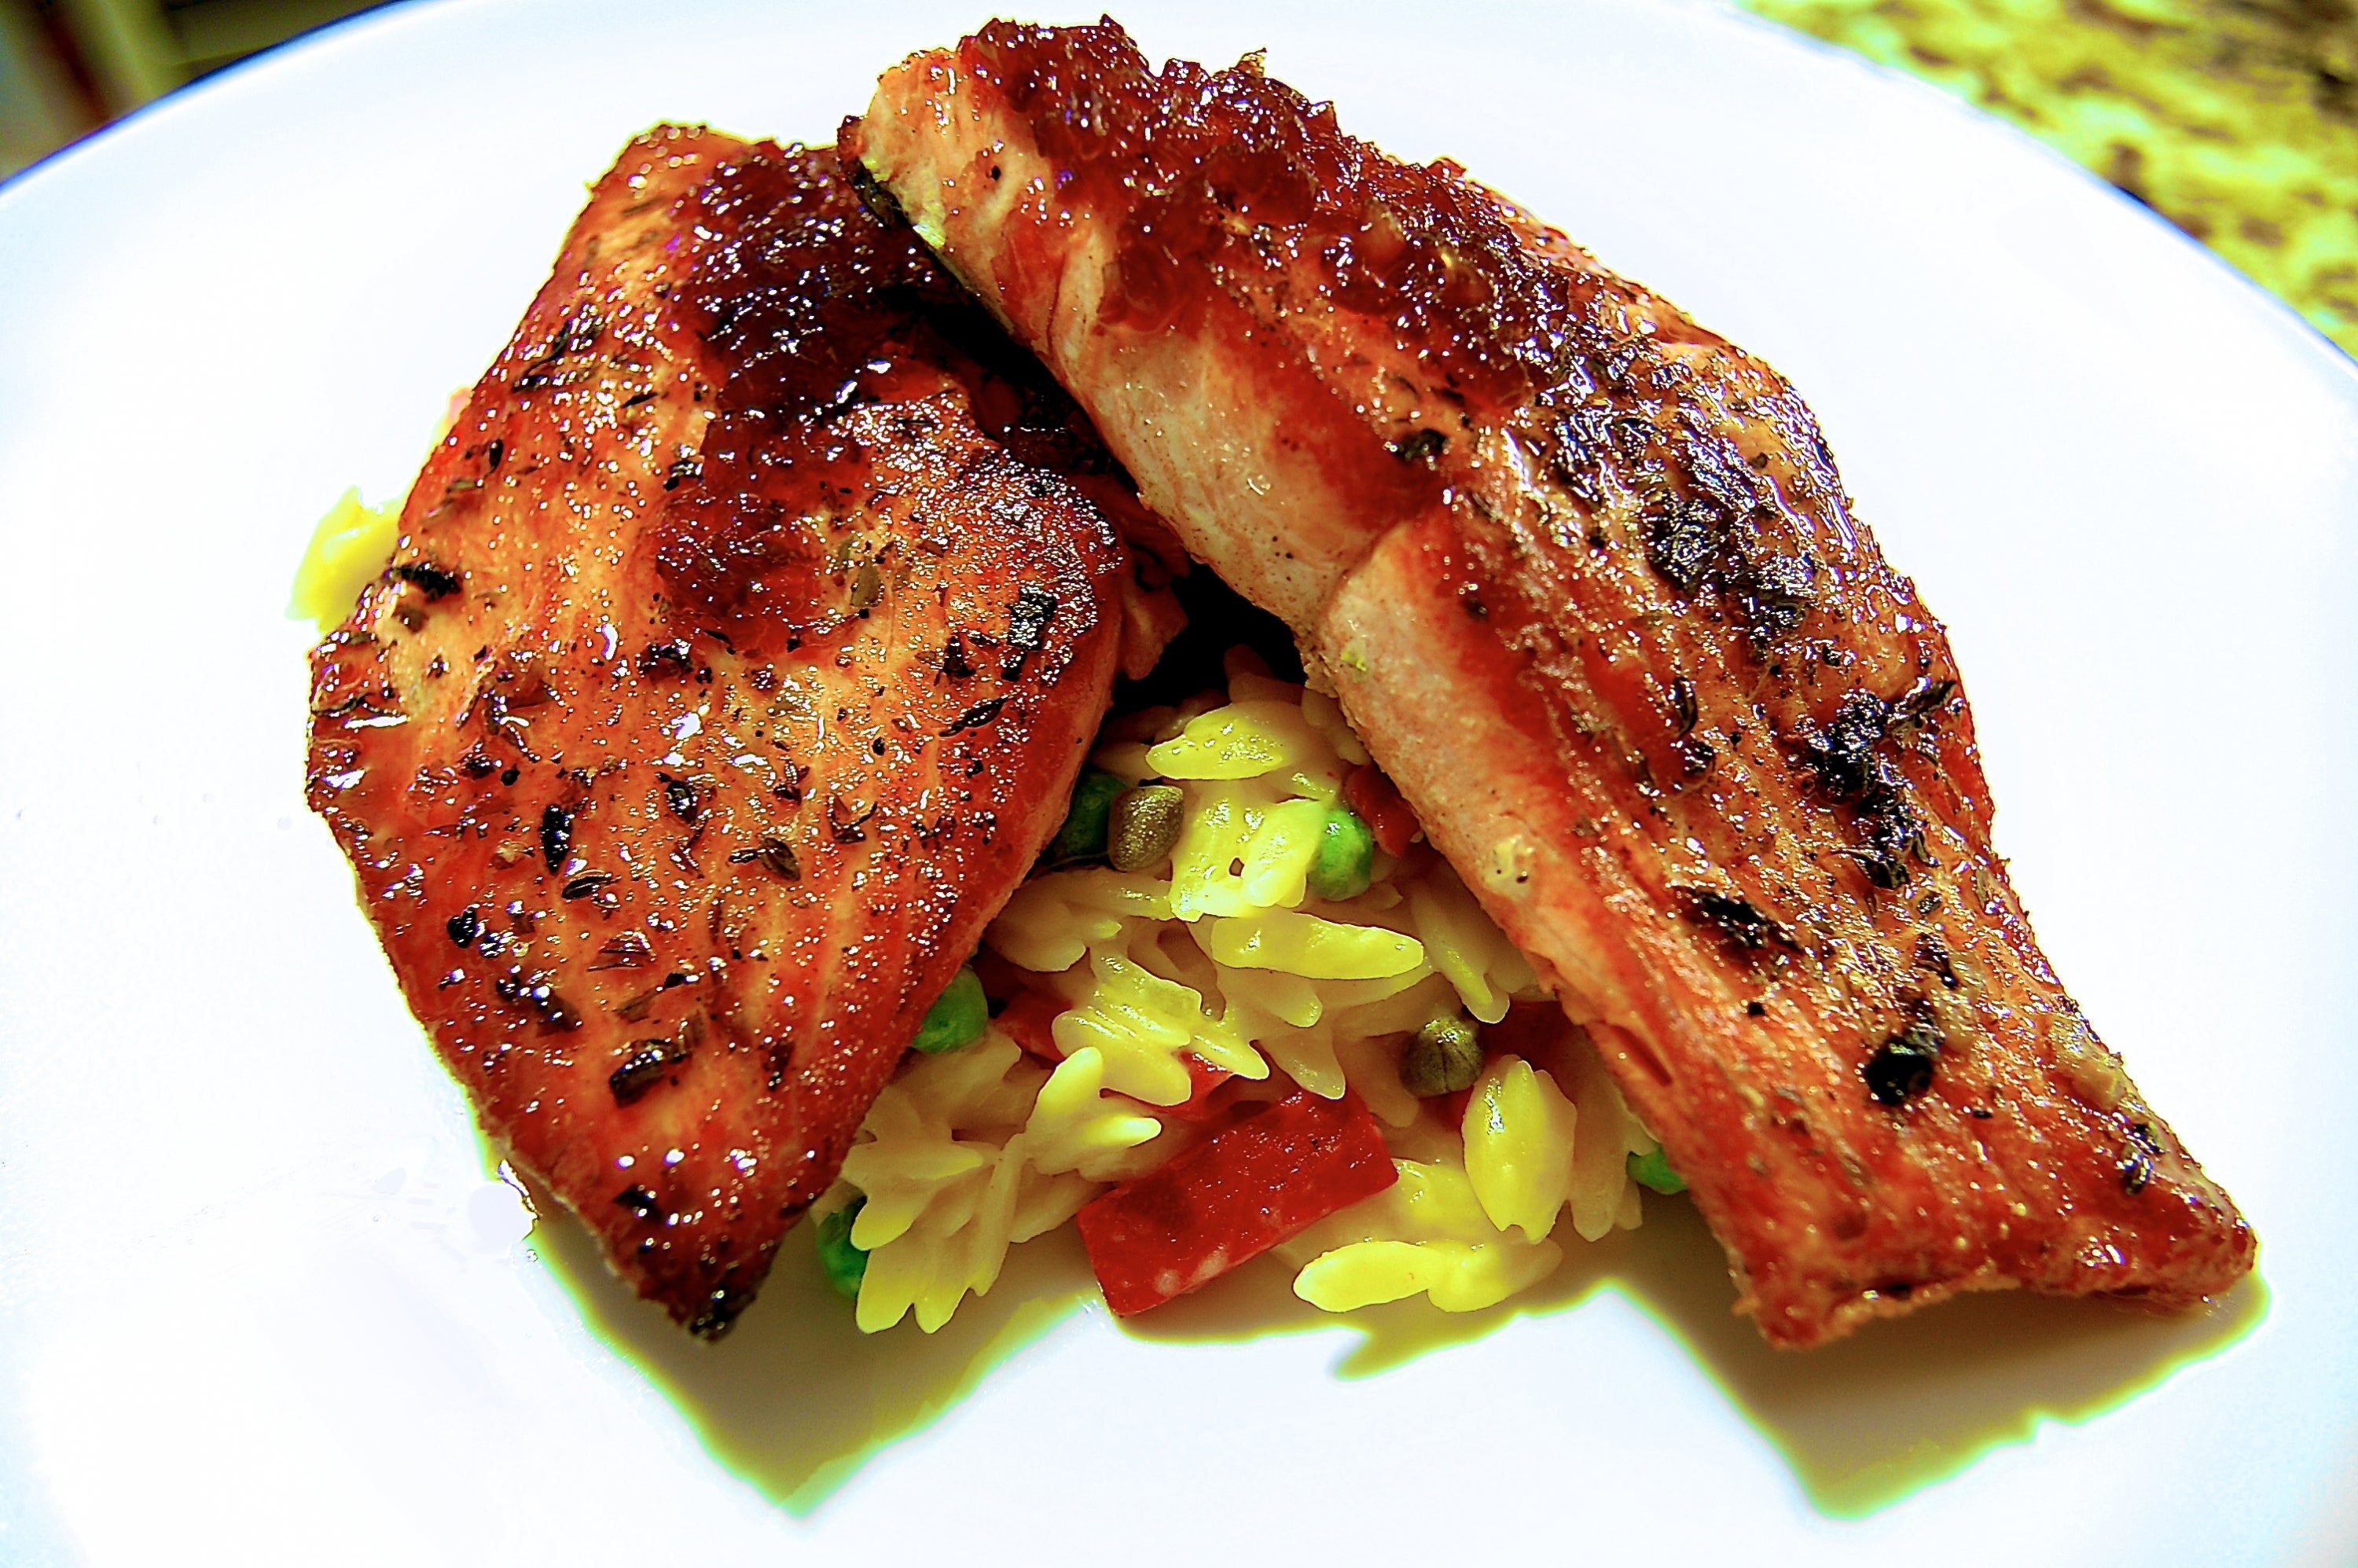 Pan seared salmon with risotto